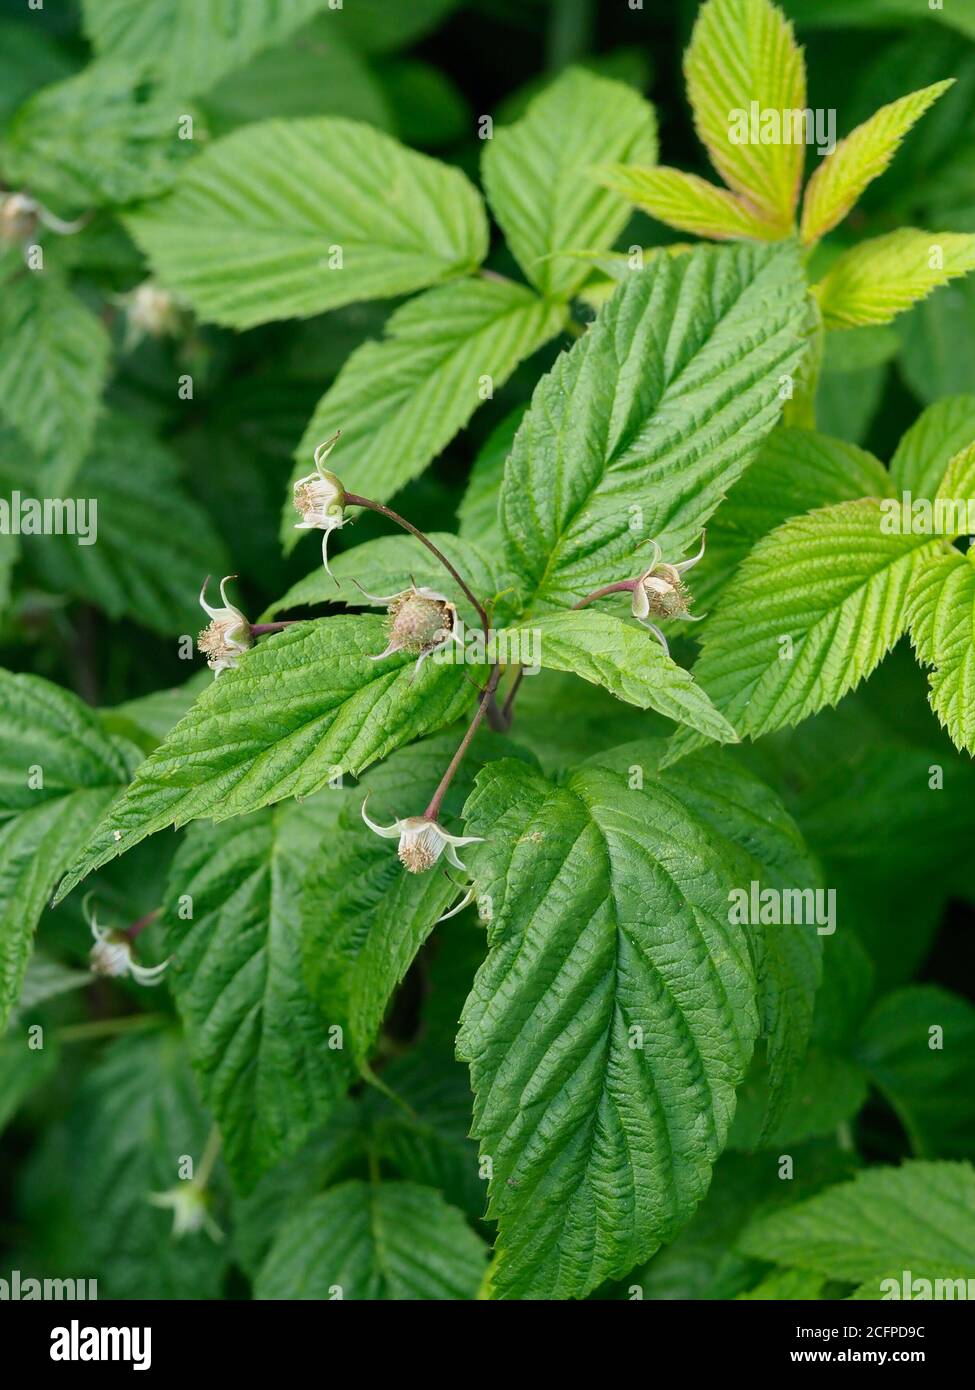 close up of raspberry plant showing raspberries starting to form but not ripen Stock Photo